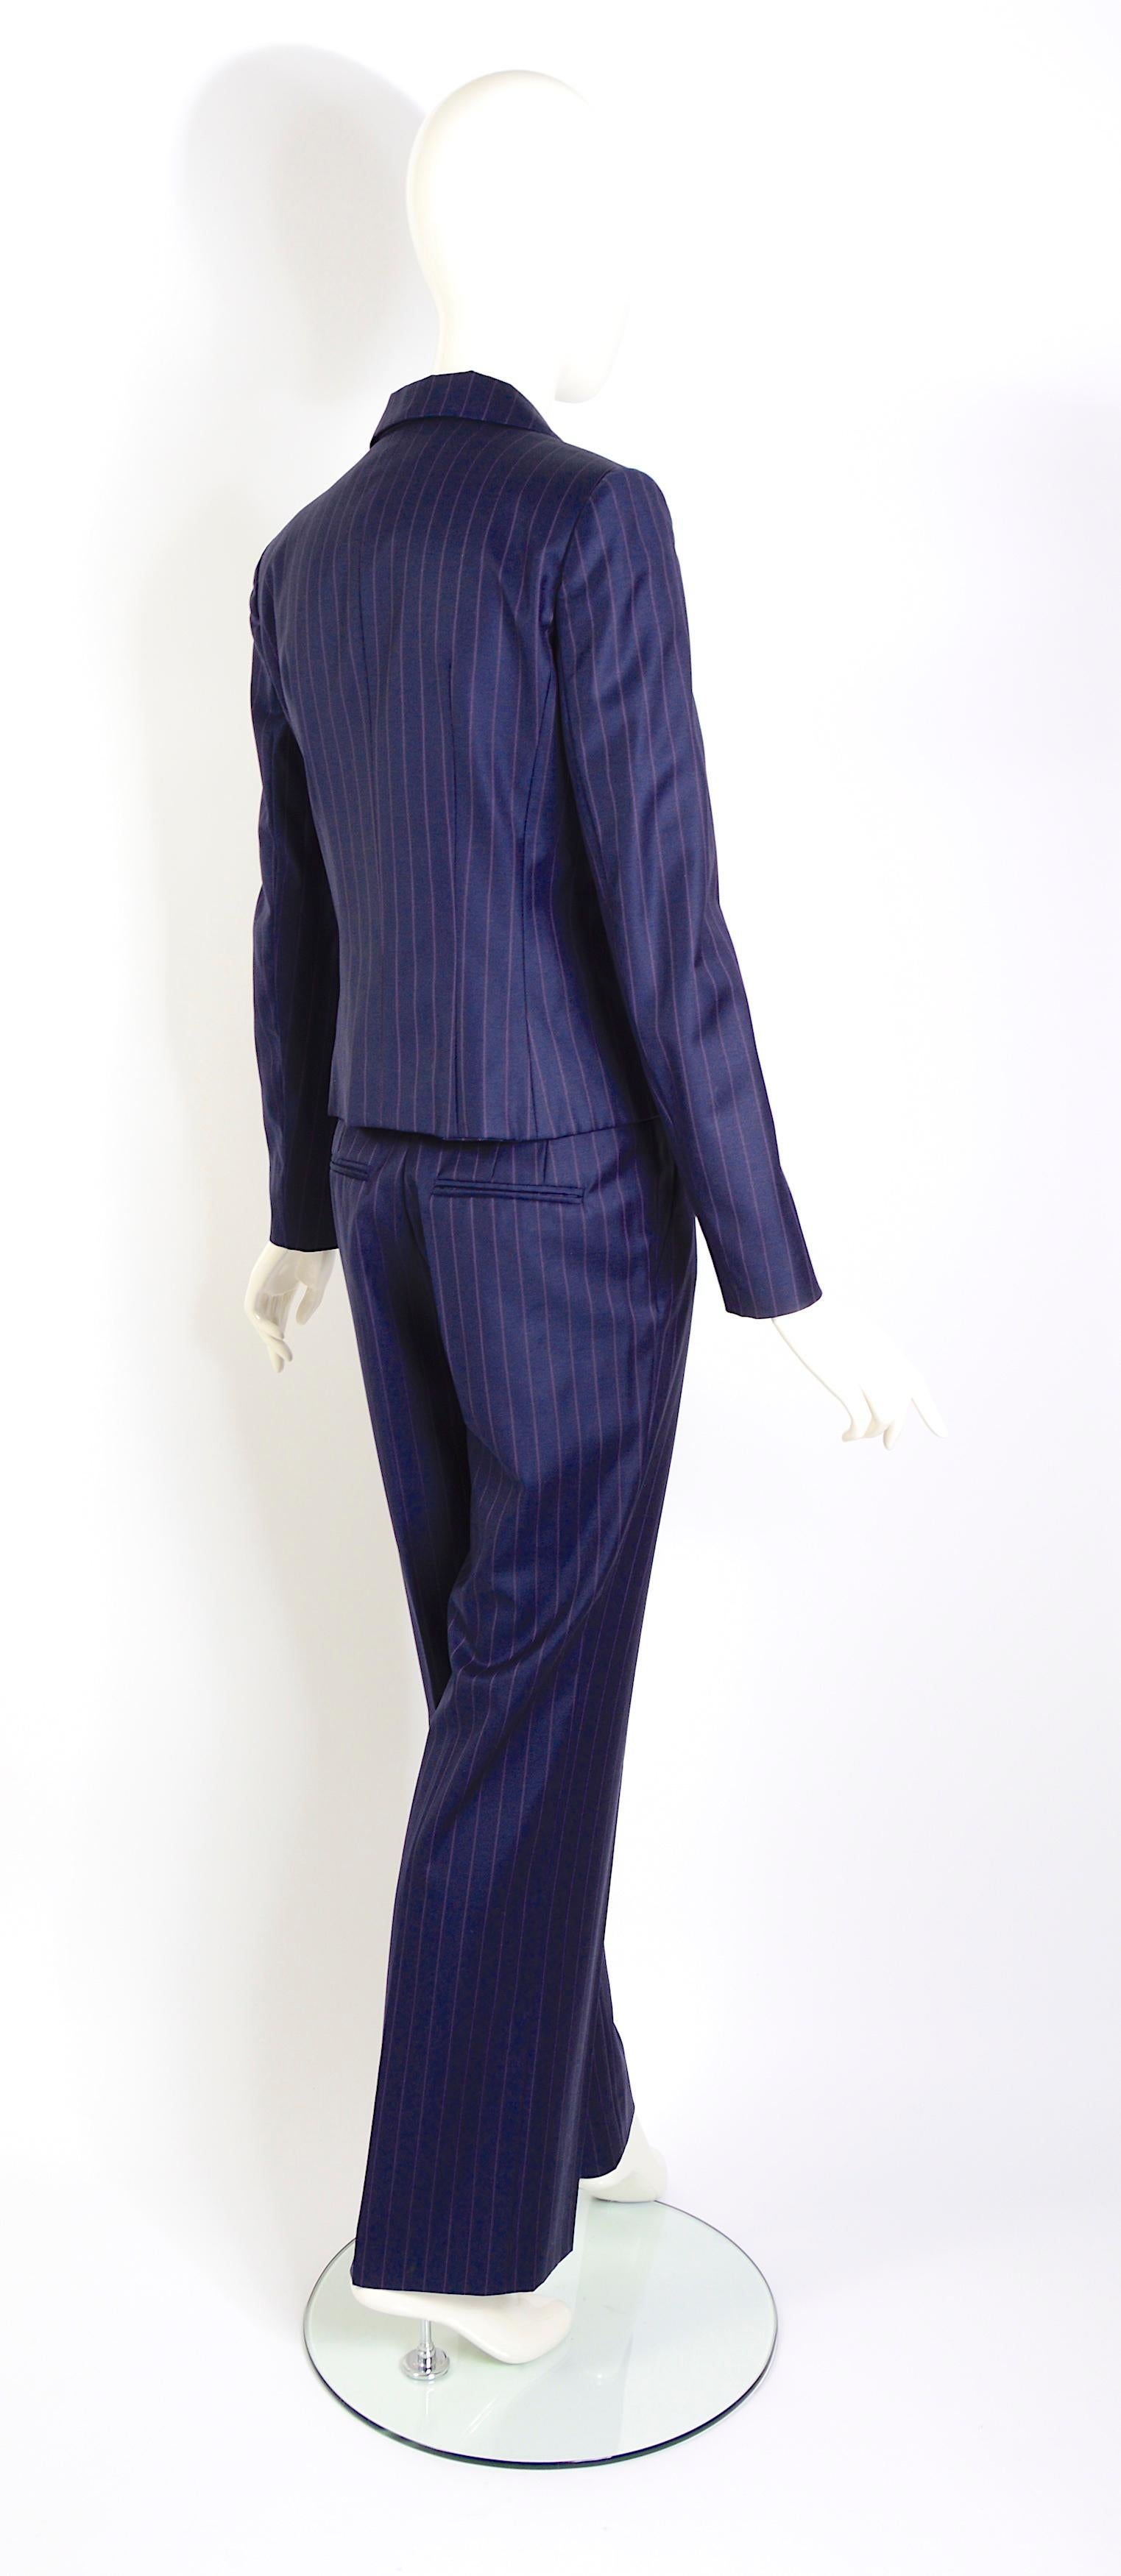 Christian Dior by John Galliano vintage S/S 2008 pin striped suit 5